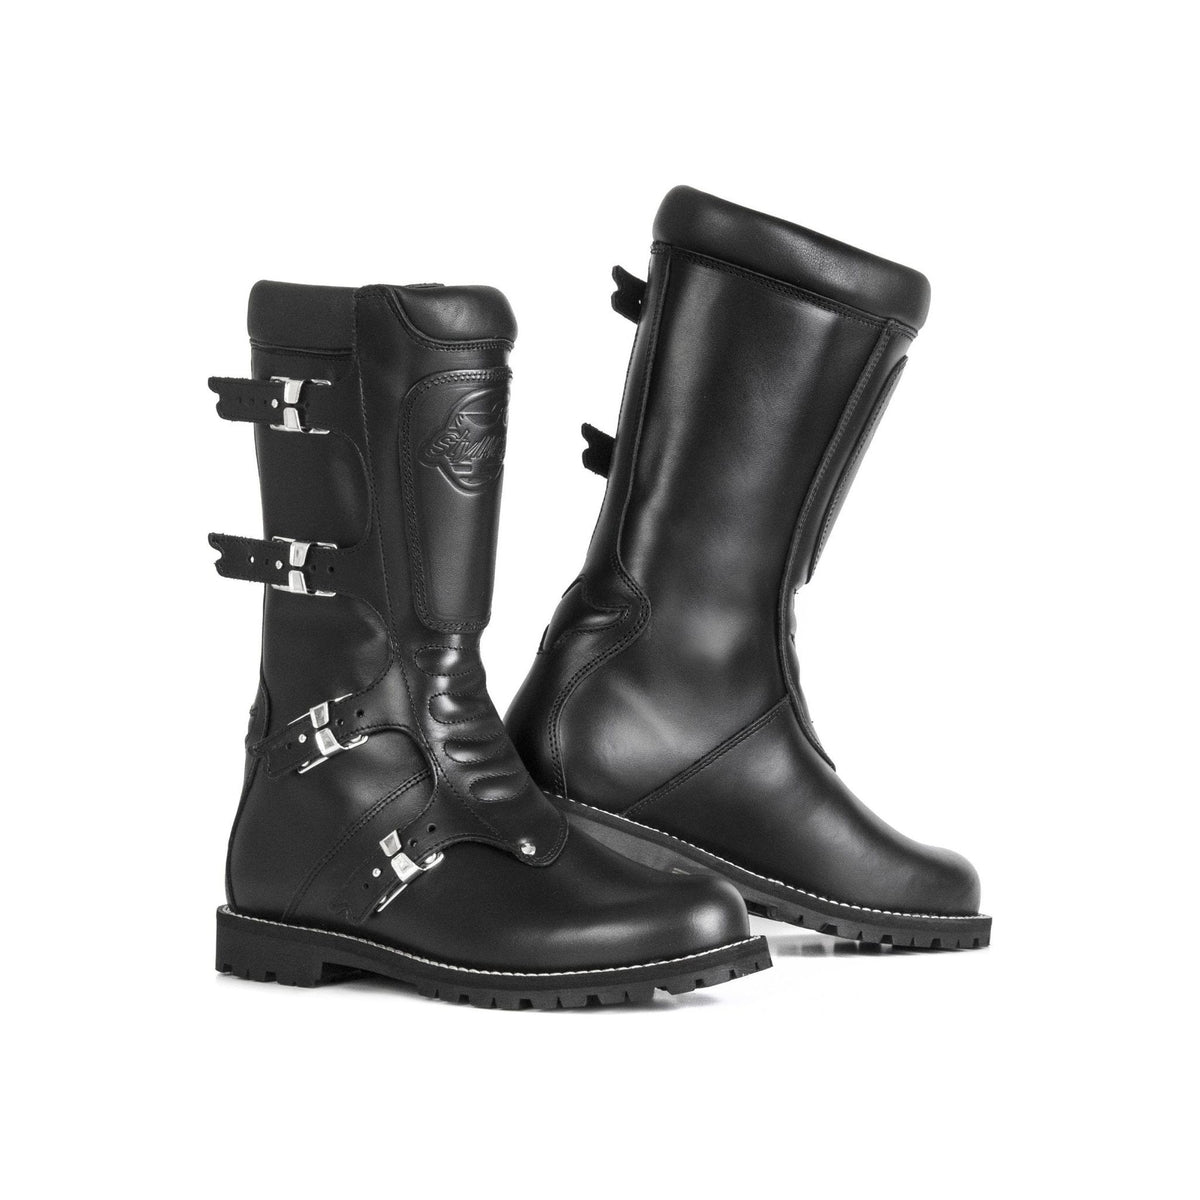 Stylmartin - Stylmartin Continental WP Touring in Black - Boots - Salt Flats Clothing